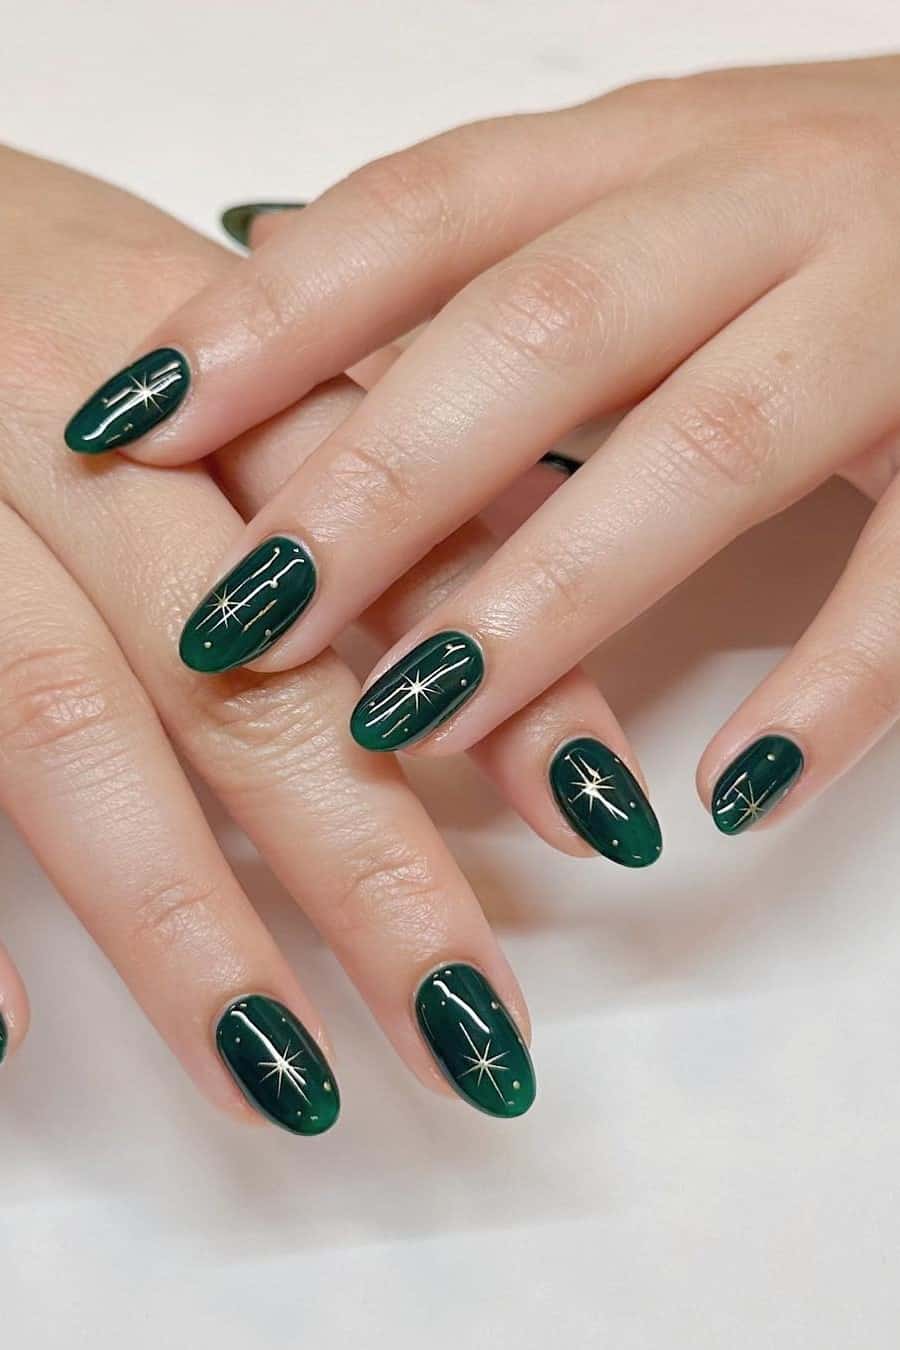 A hand with short round nails painted a glossy emerald green with gold sparkles and dot details